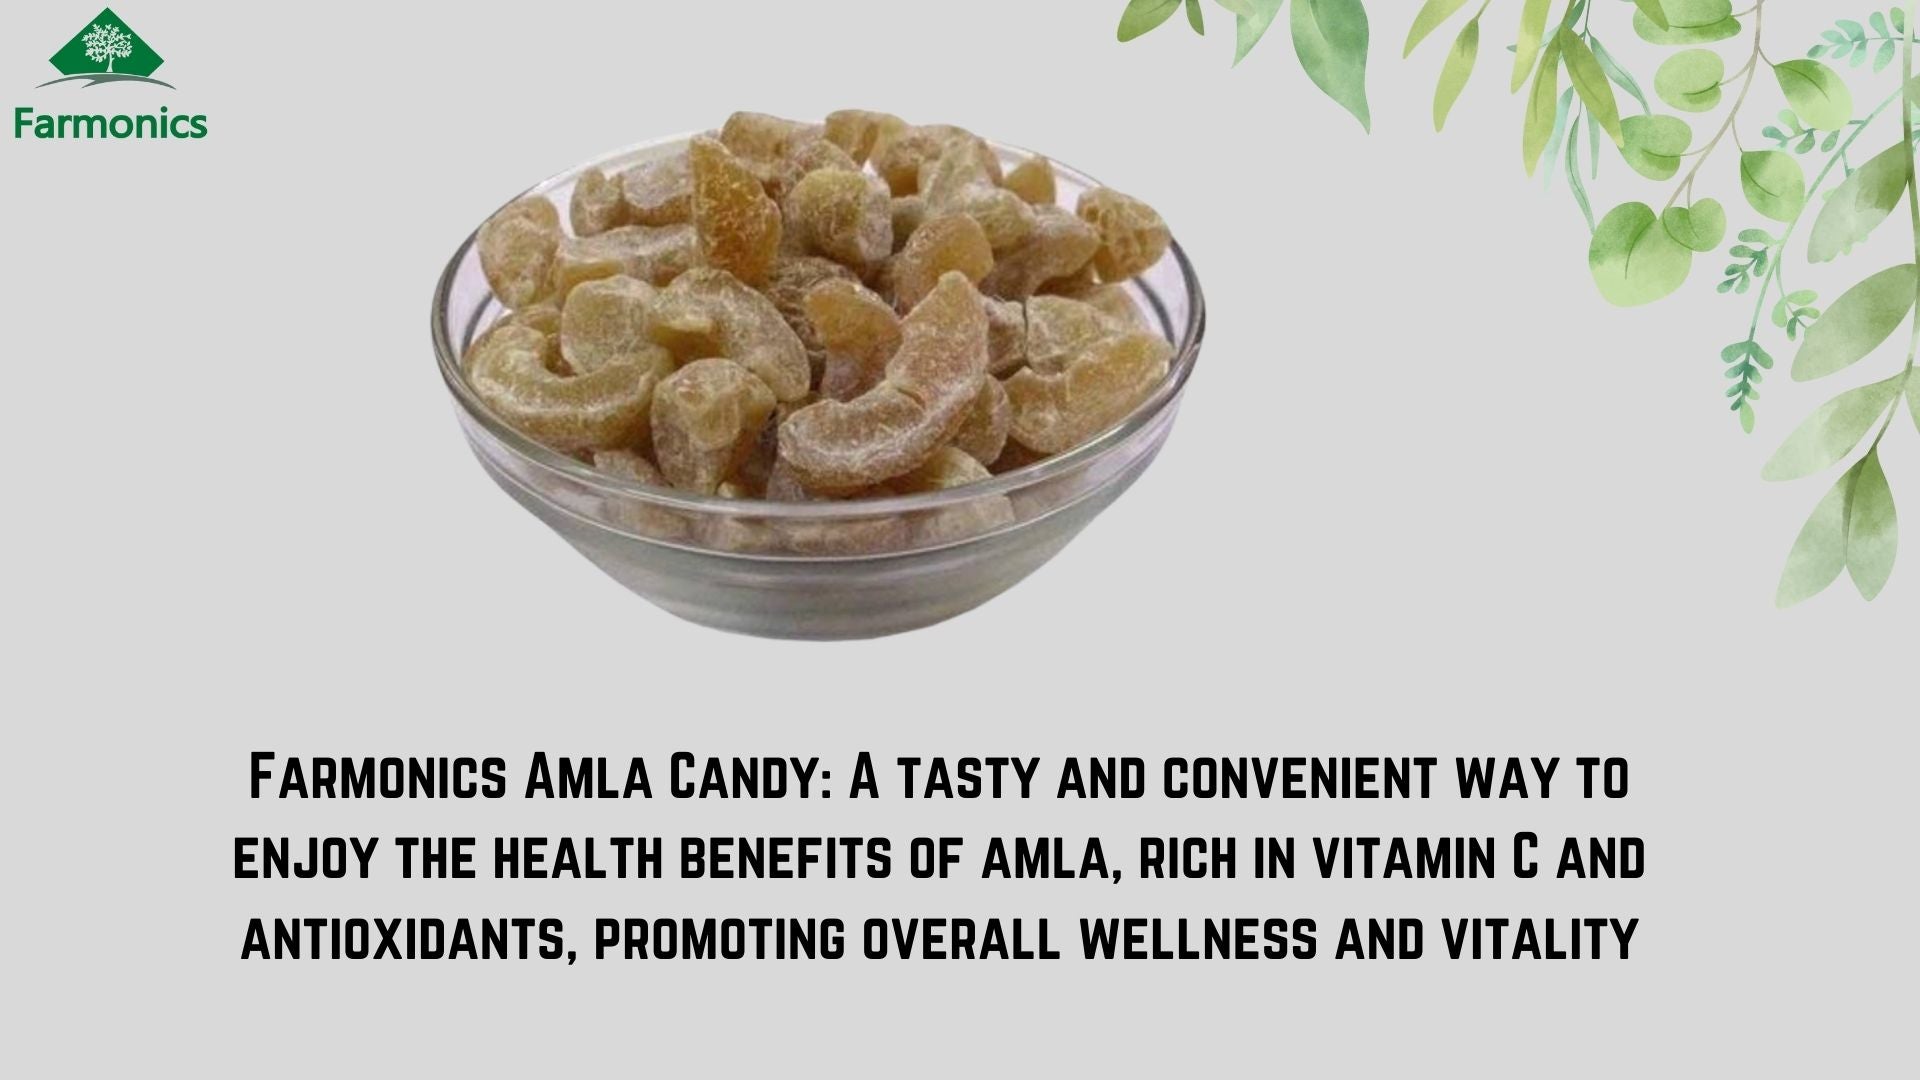 Here are some of the information about amla candy 